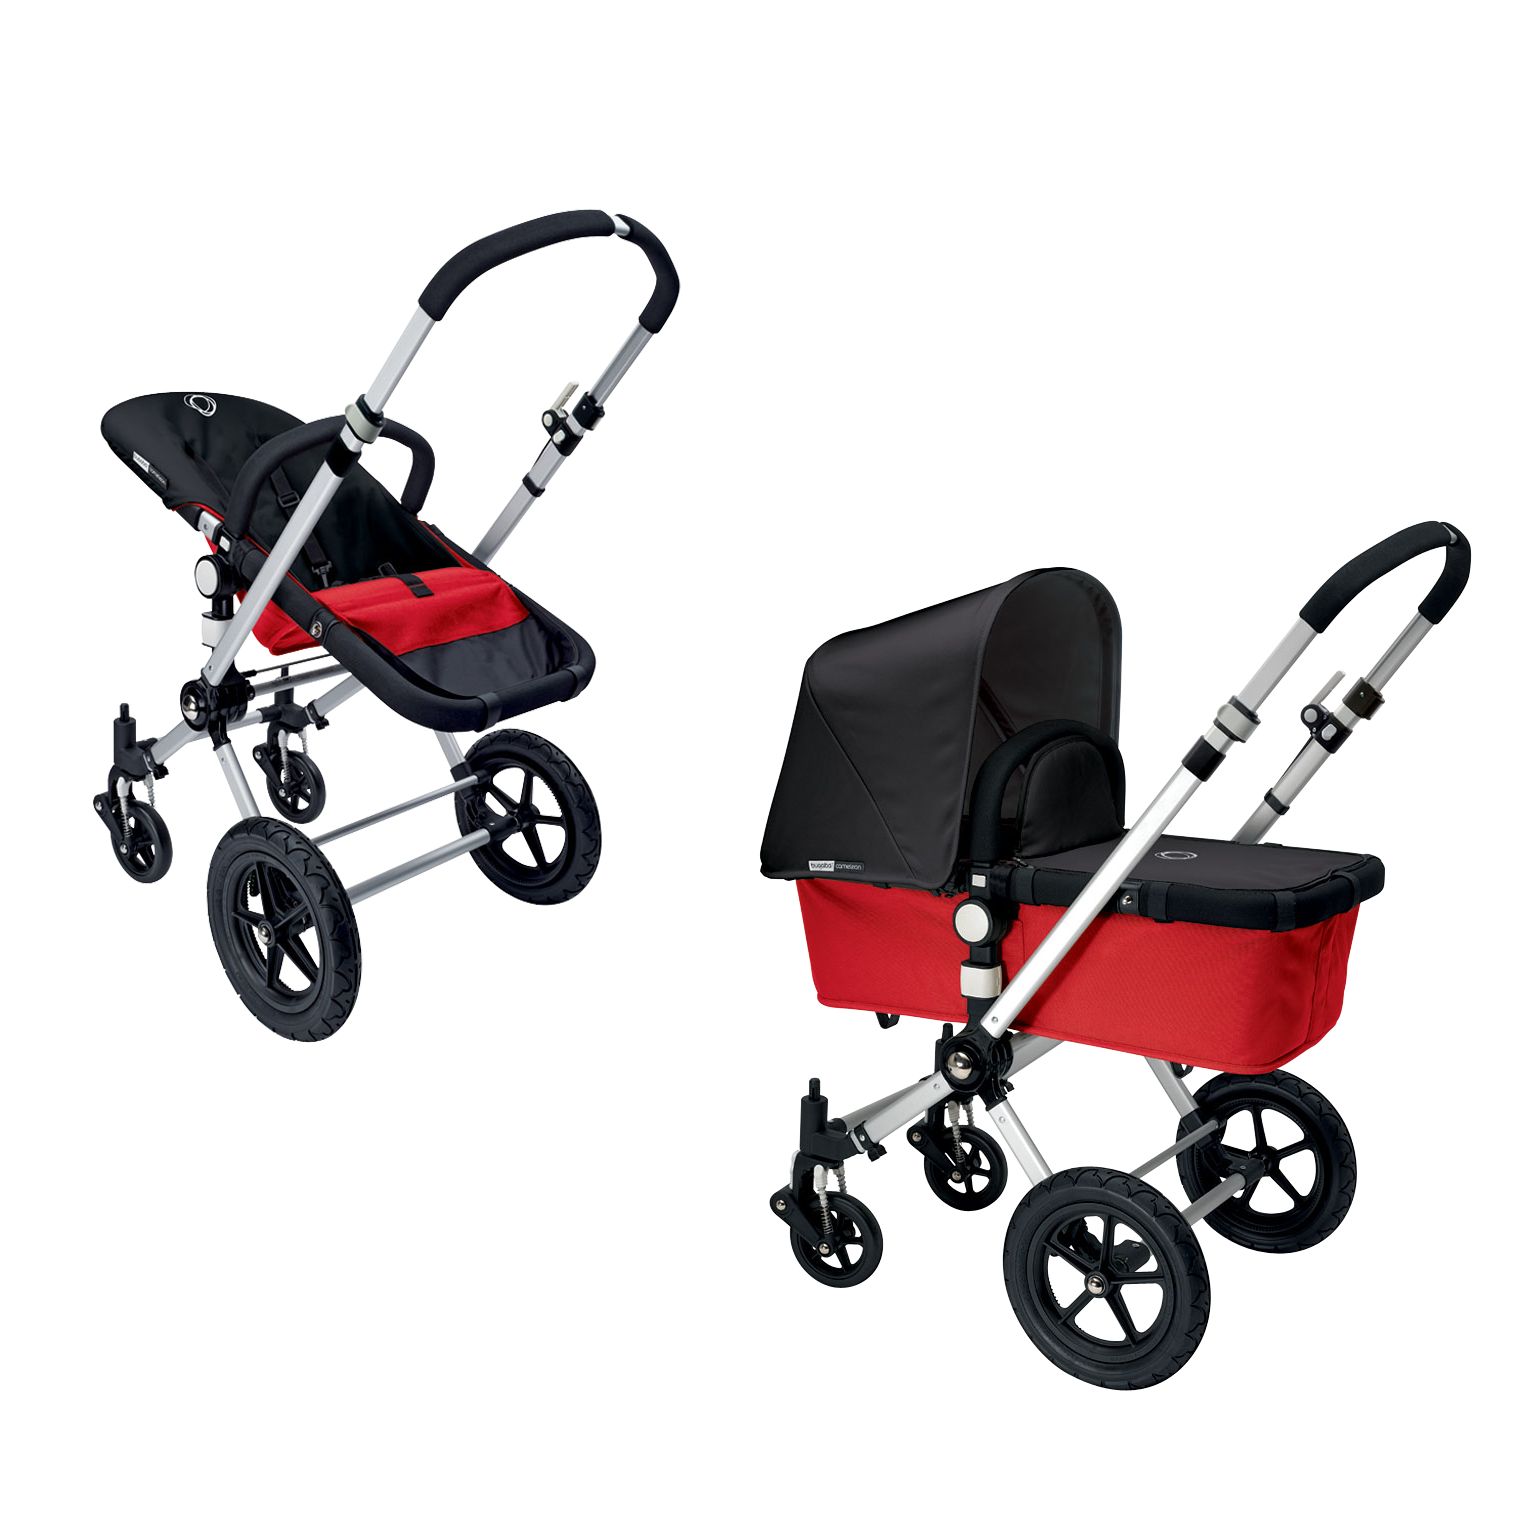 Bugaboo Cameleon Base Unit and Carrycot (3 in 1 Travel System) at John Lewis